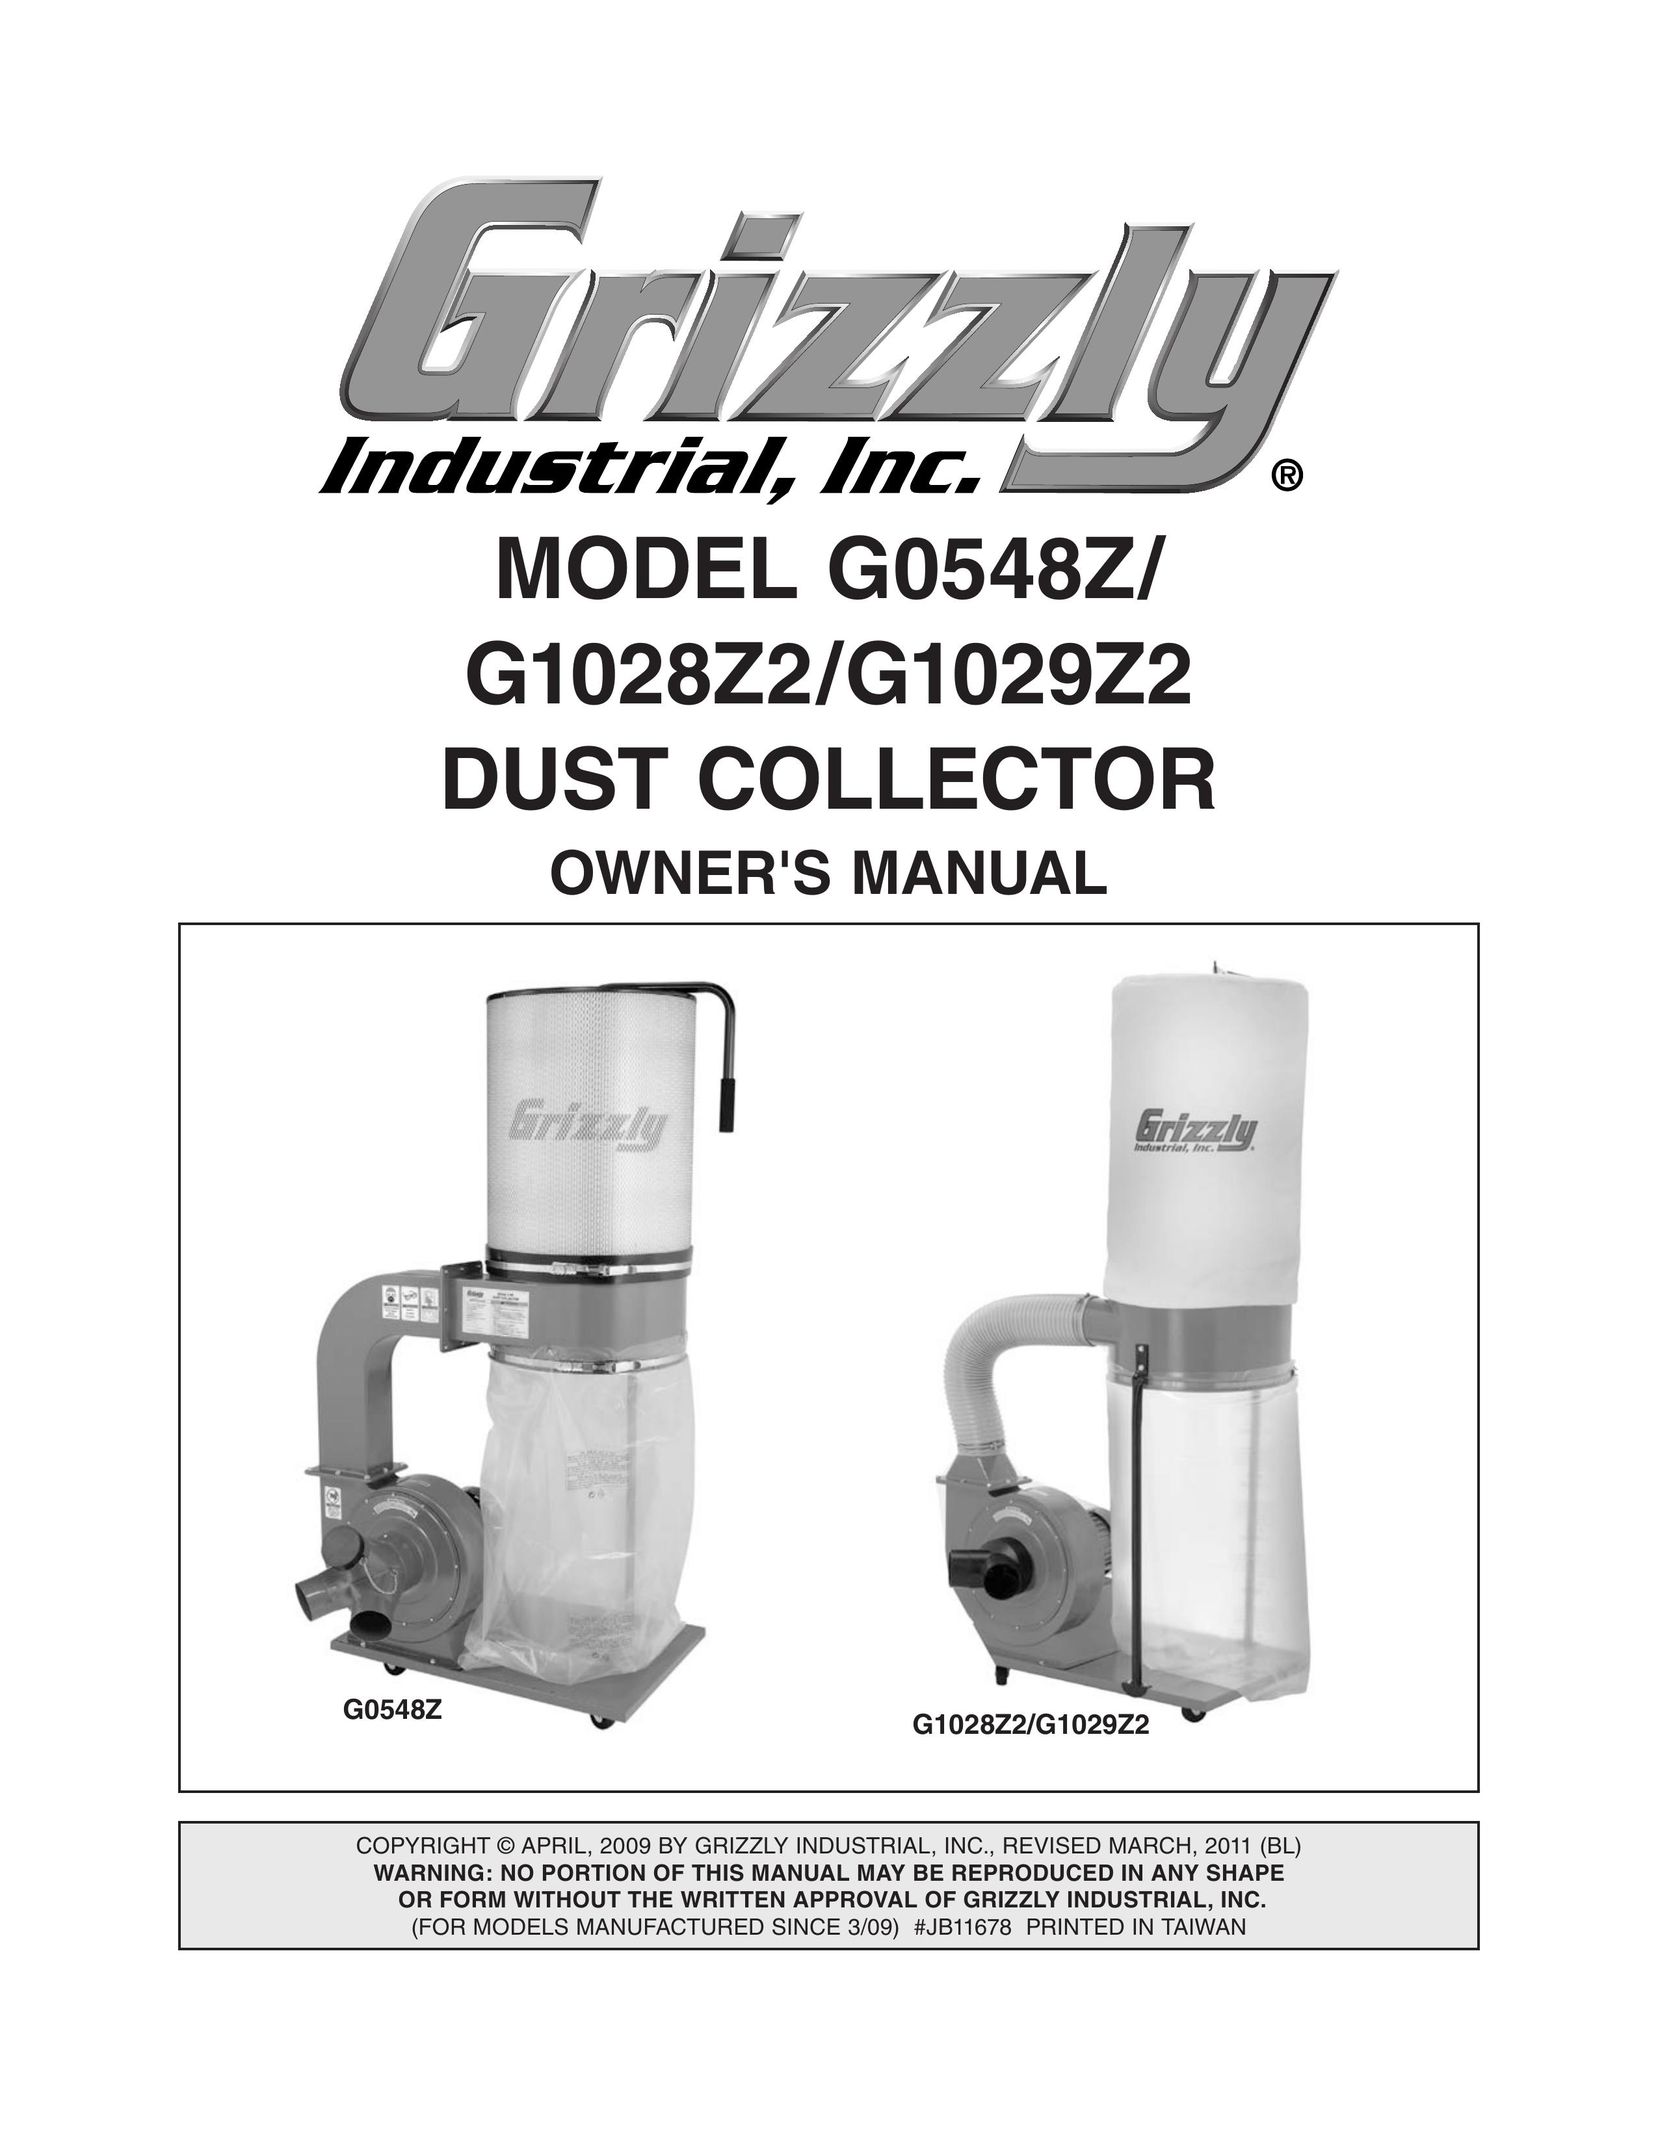 Grizzly G1029Z2 Dust Collector User Manual